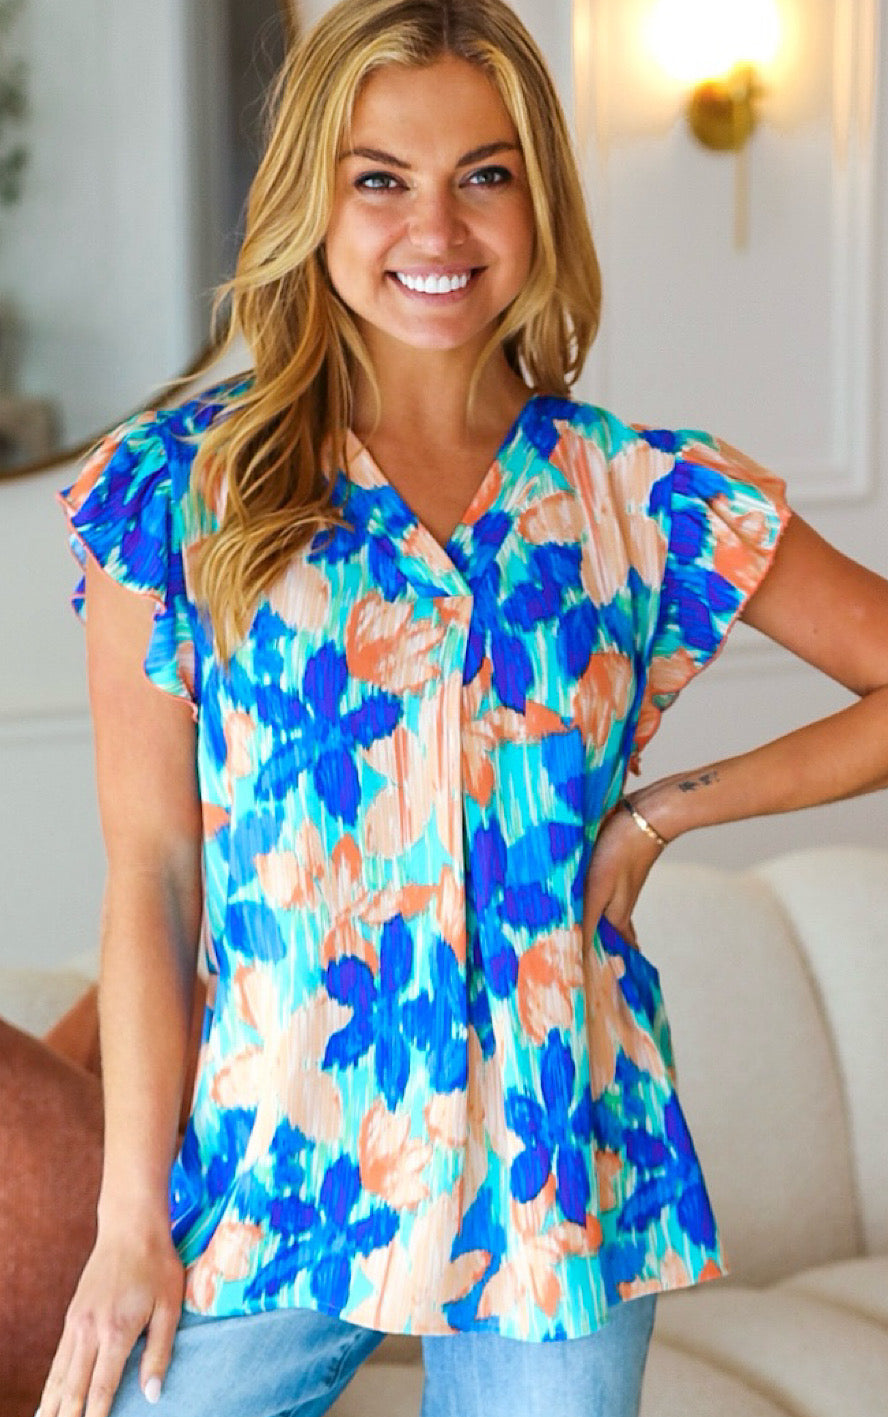 Ocean Breezes Turquoise Floral Top, SMALL LEFT!